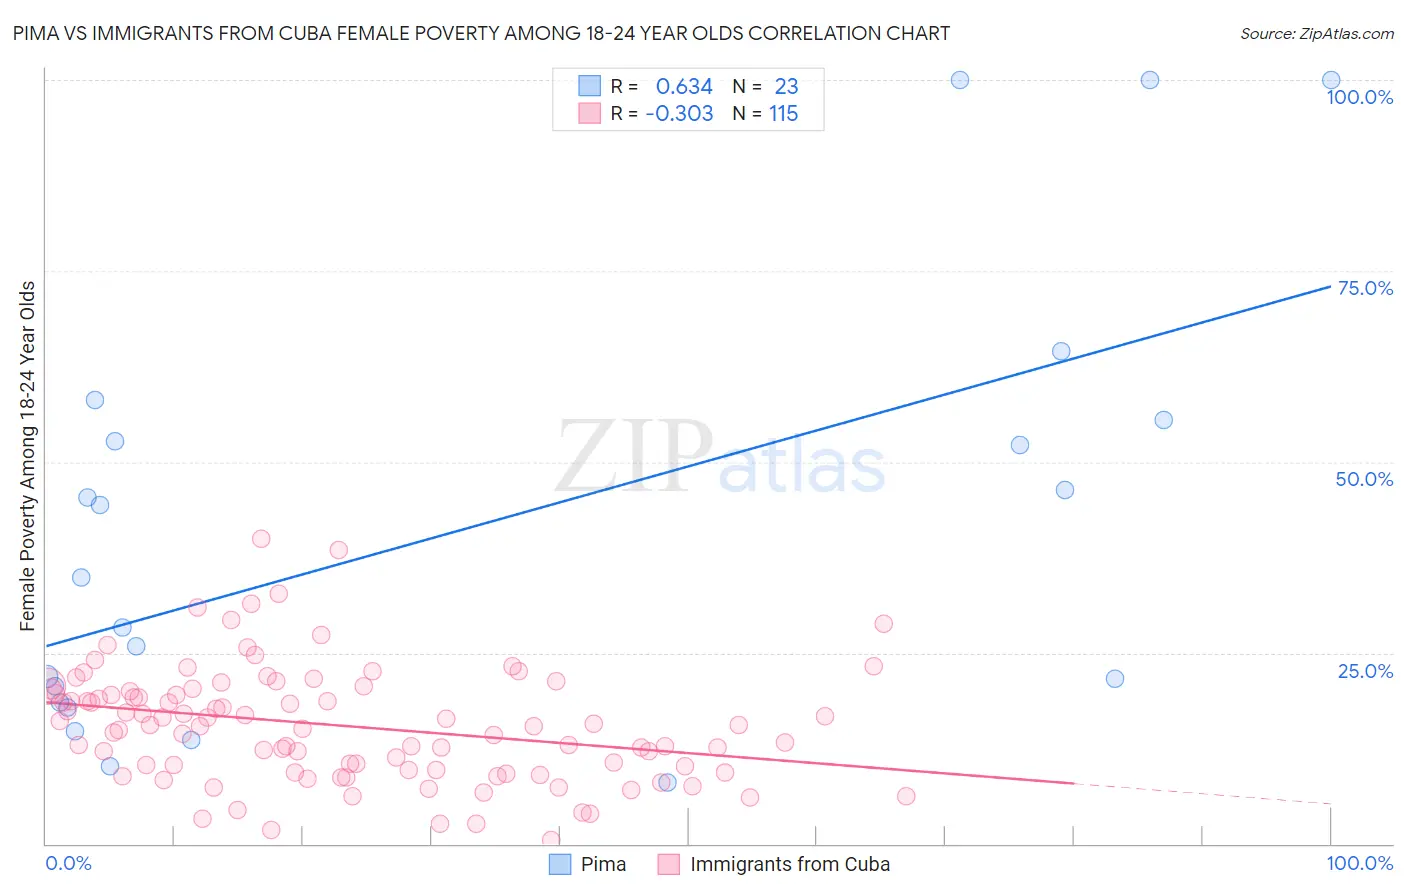 Pima vs Immigrants from Cuba Female Poverty Among 18-24 Year Olds